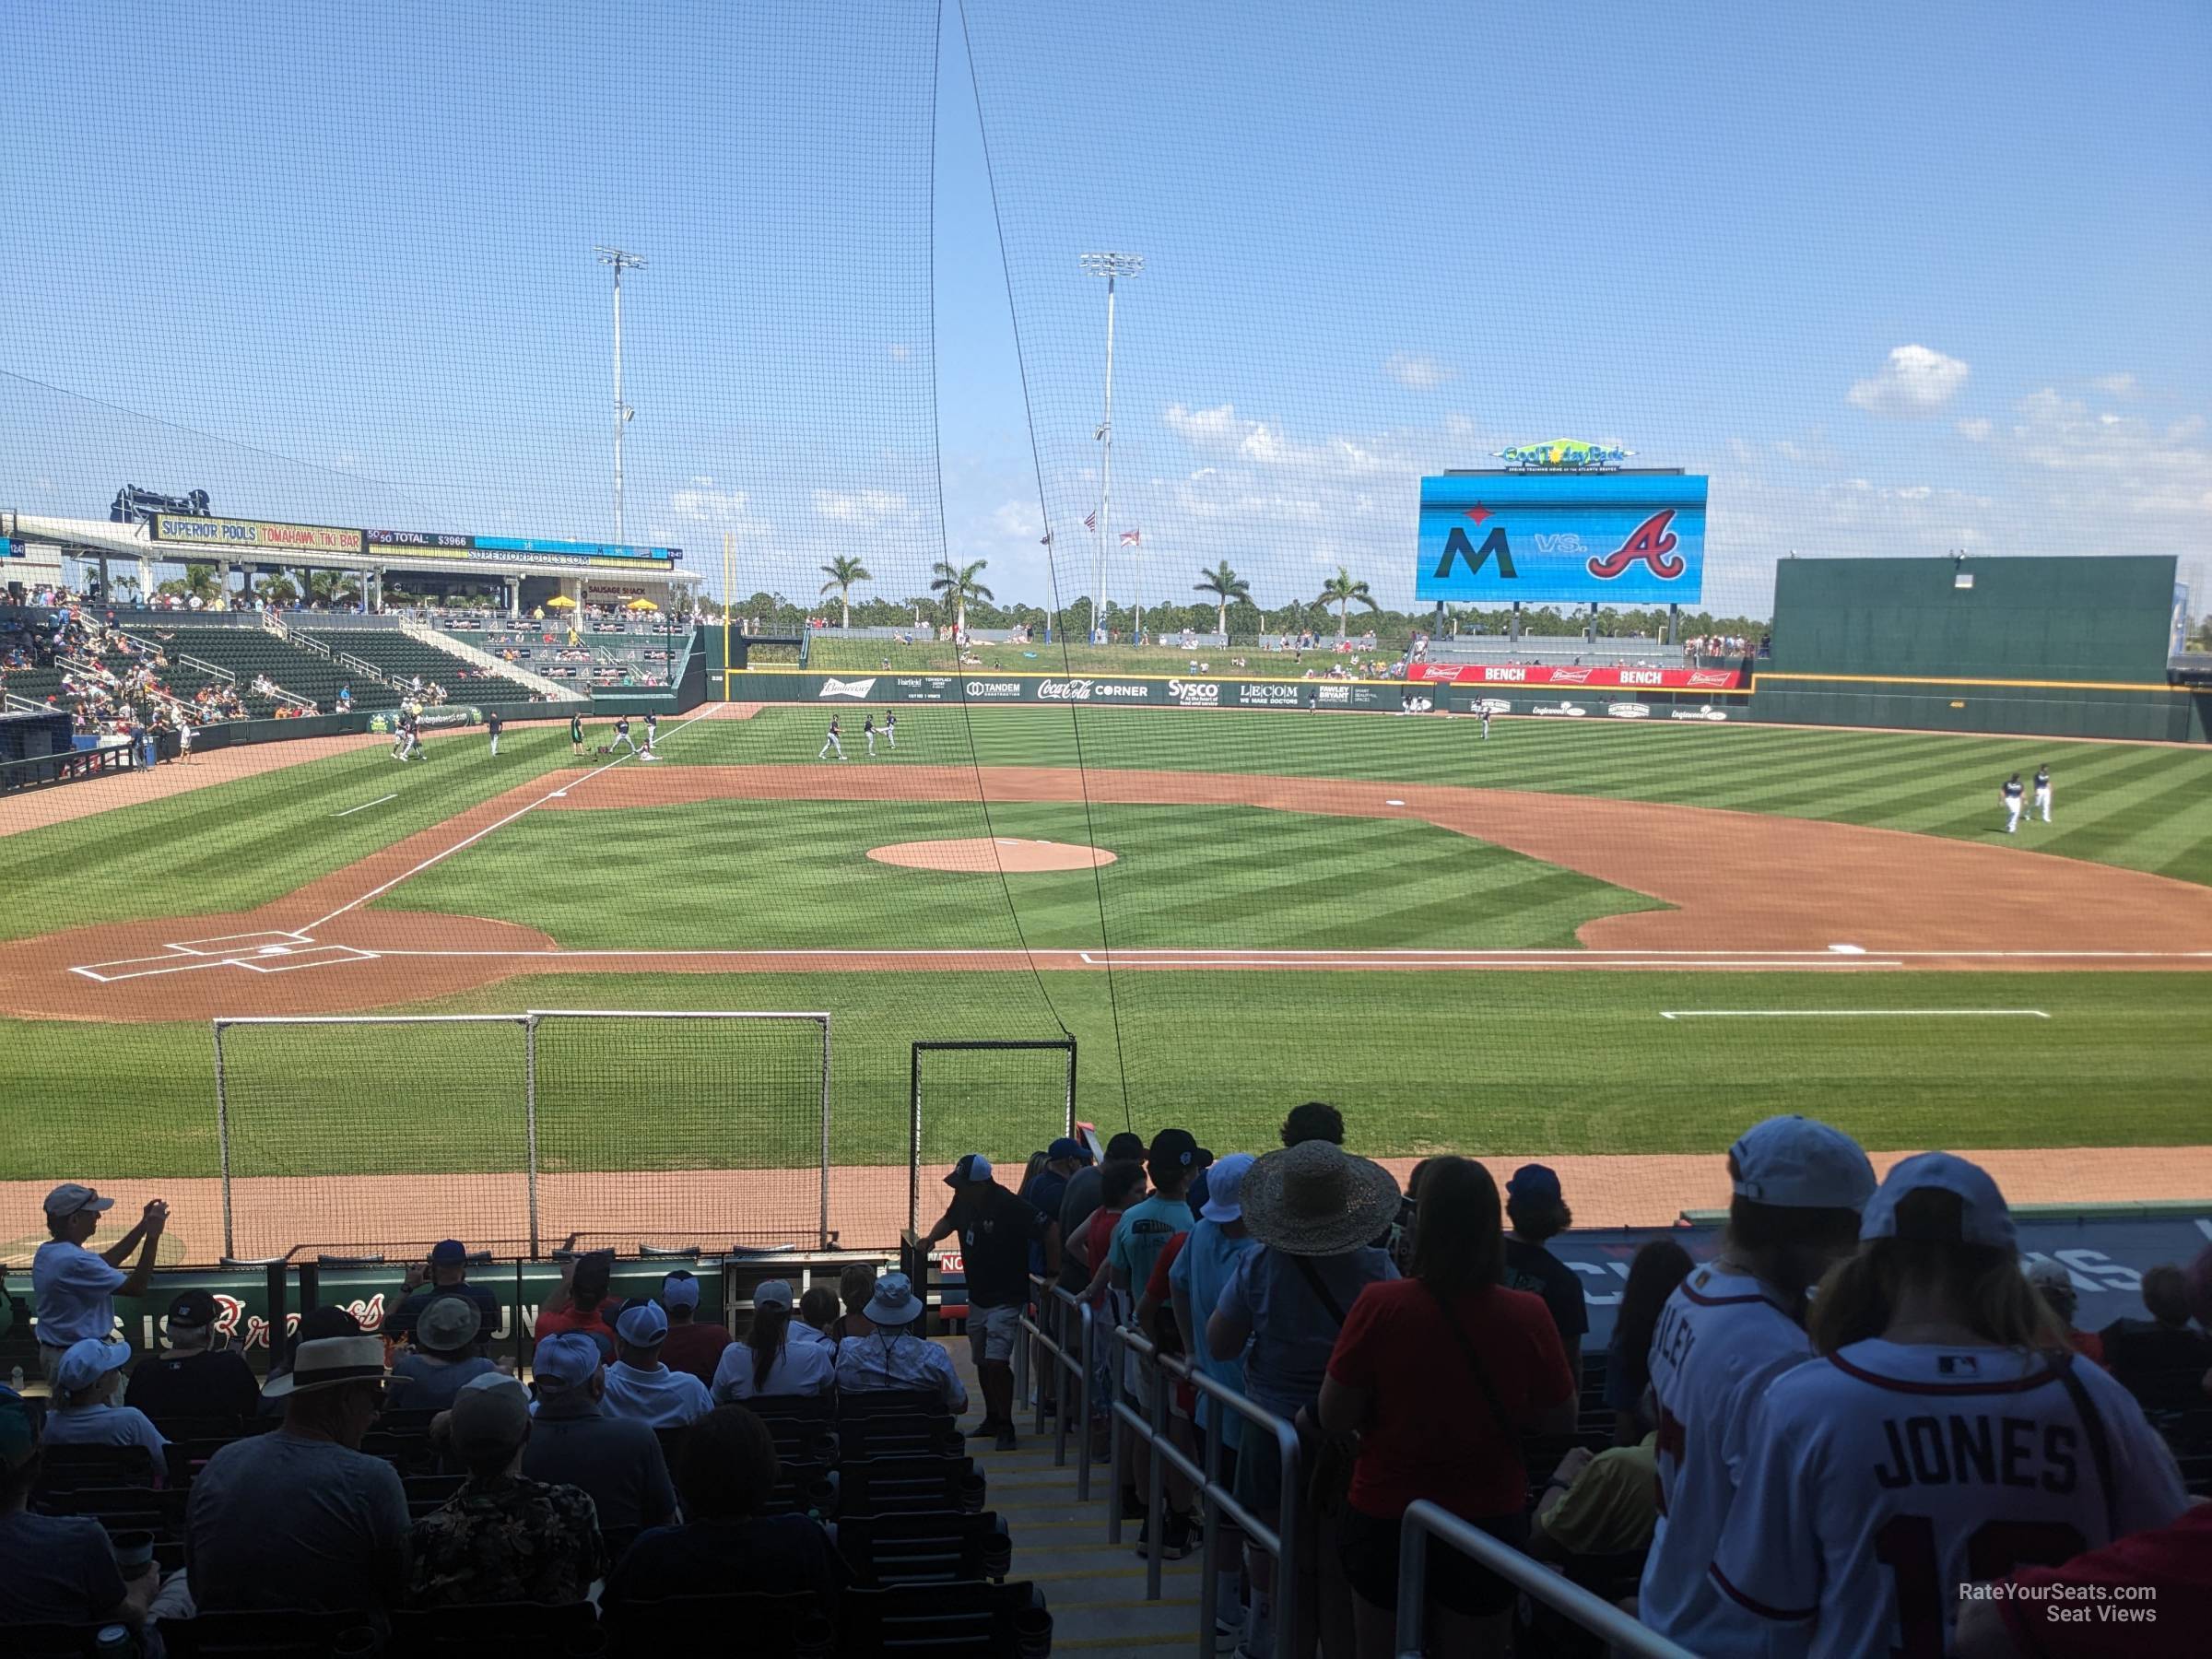 section 110, row 14 seat view  - cooltoday park